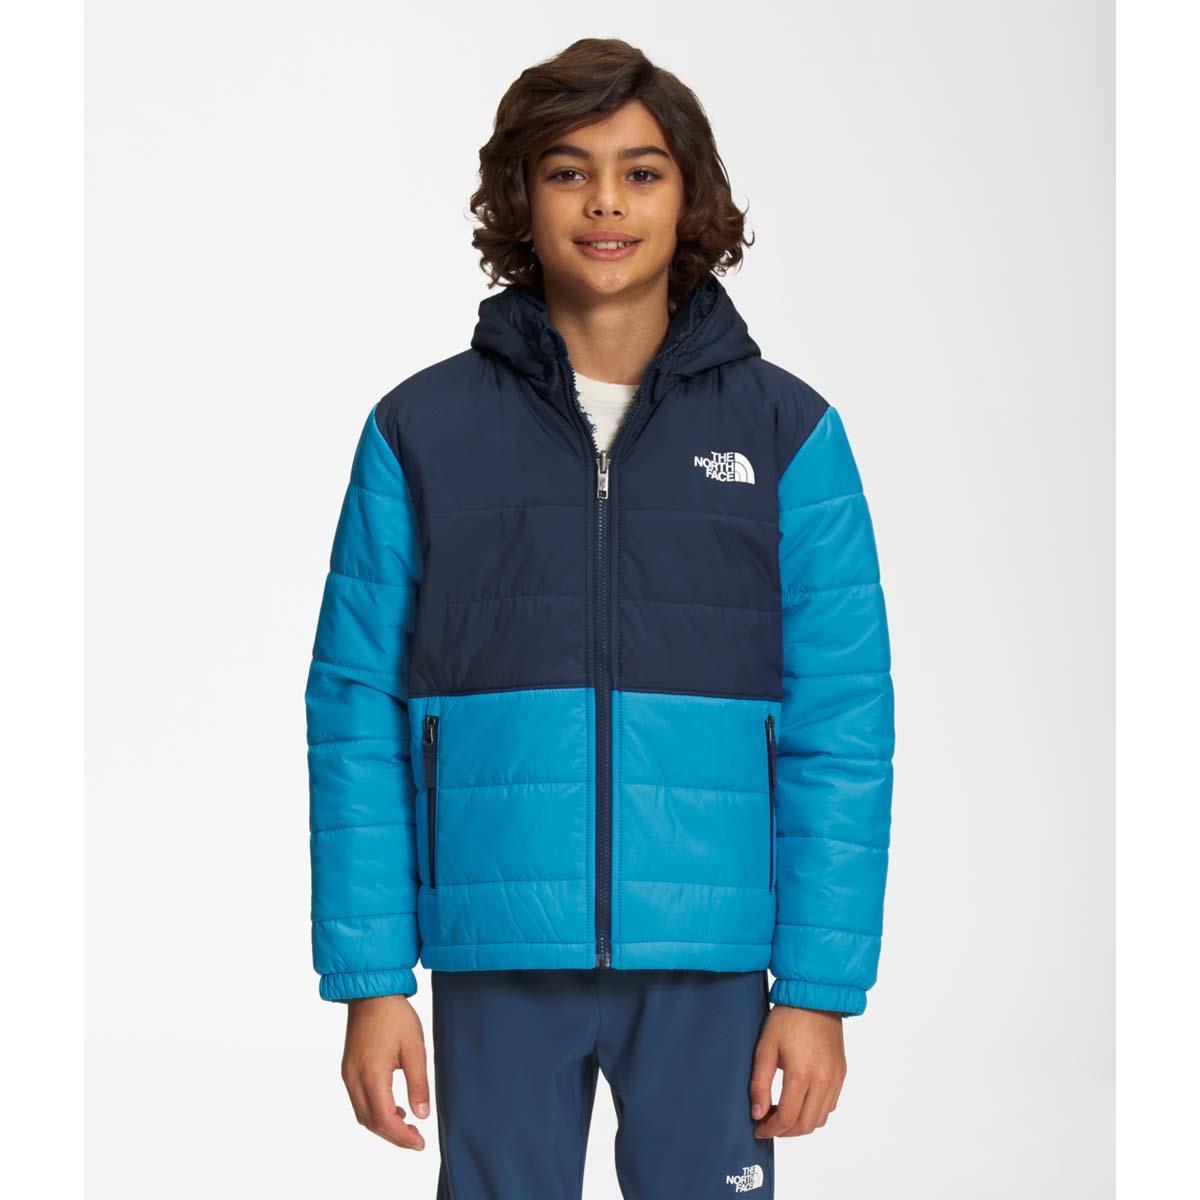 North Face Boys Mount Chimbo Jacket - Reversible & Hooded | WinterKids